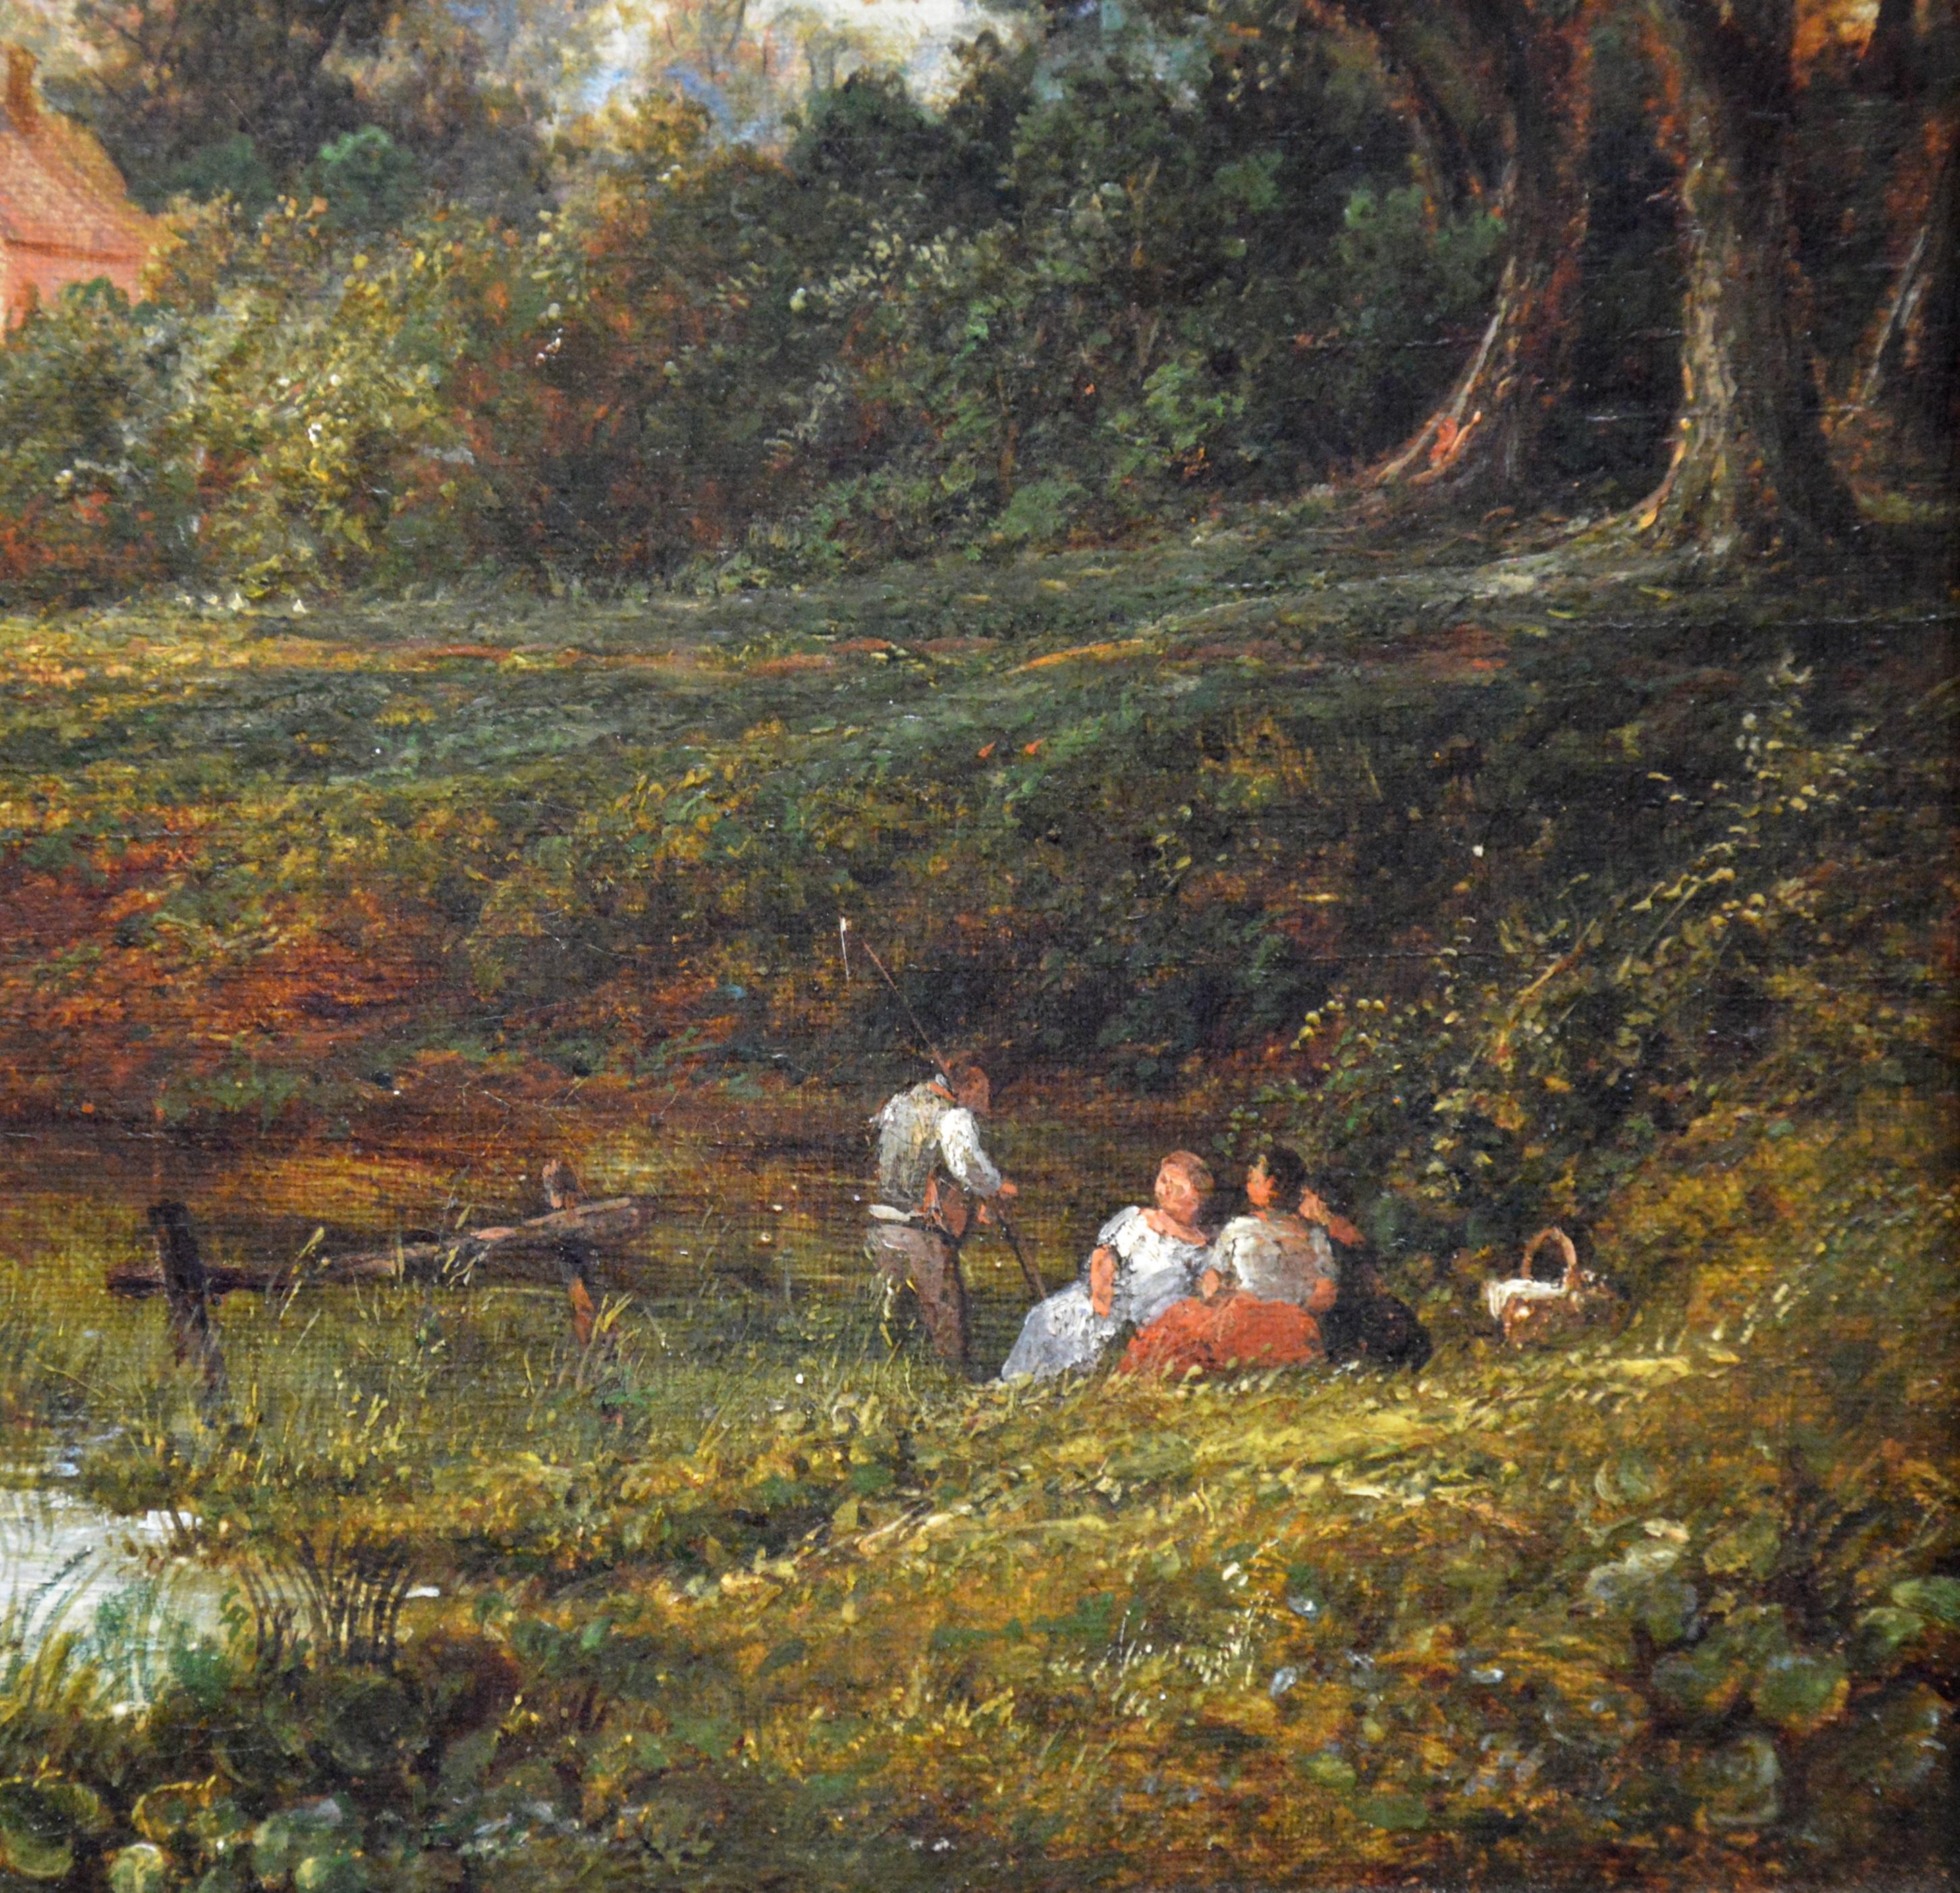 19th Century English Summer Landscape with Figures by a Stream - Victorian Painting by Benjamin Shipham